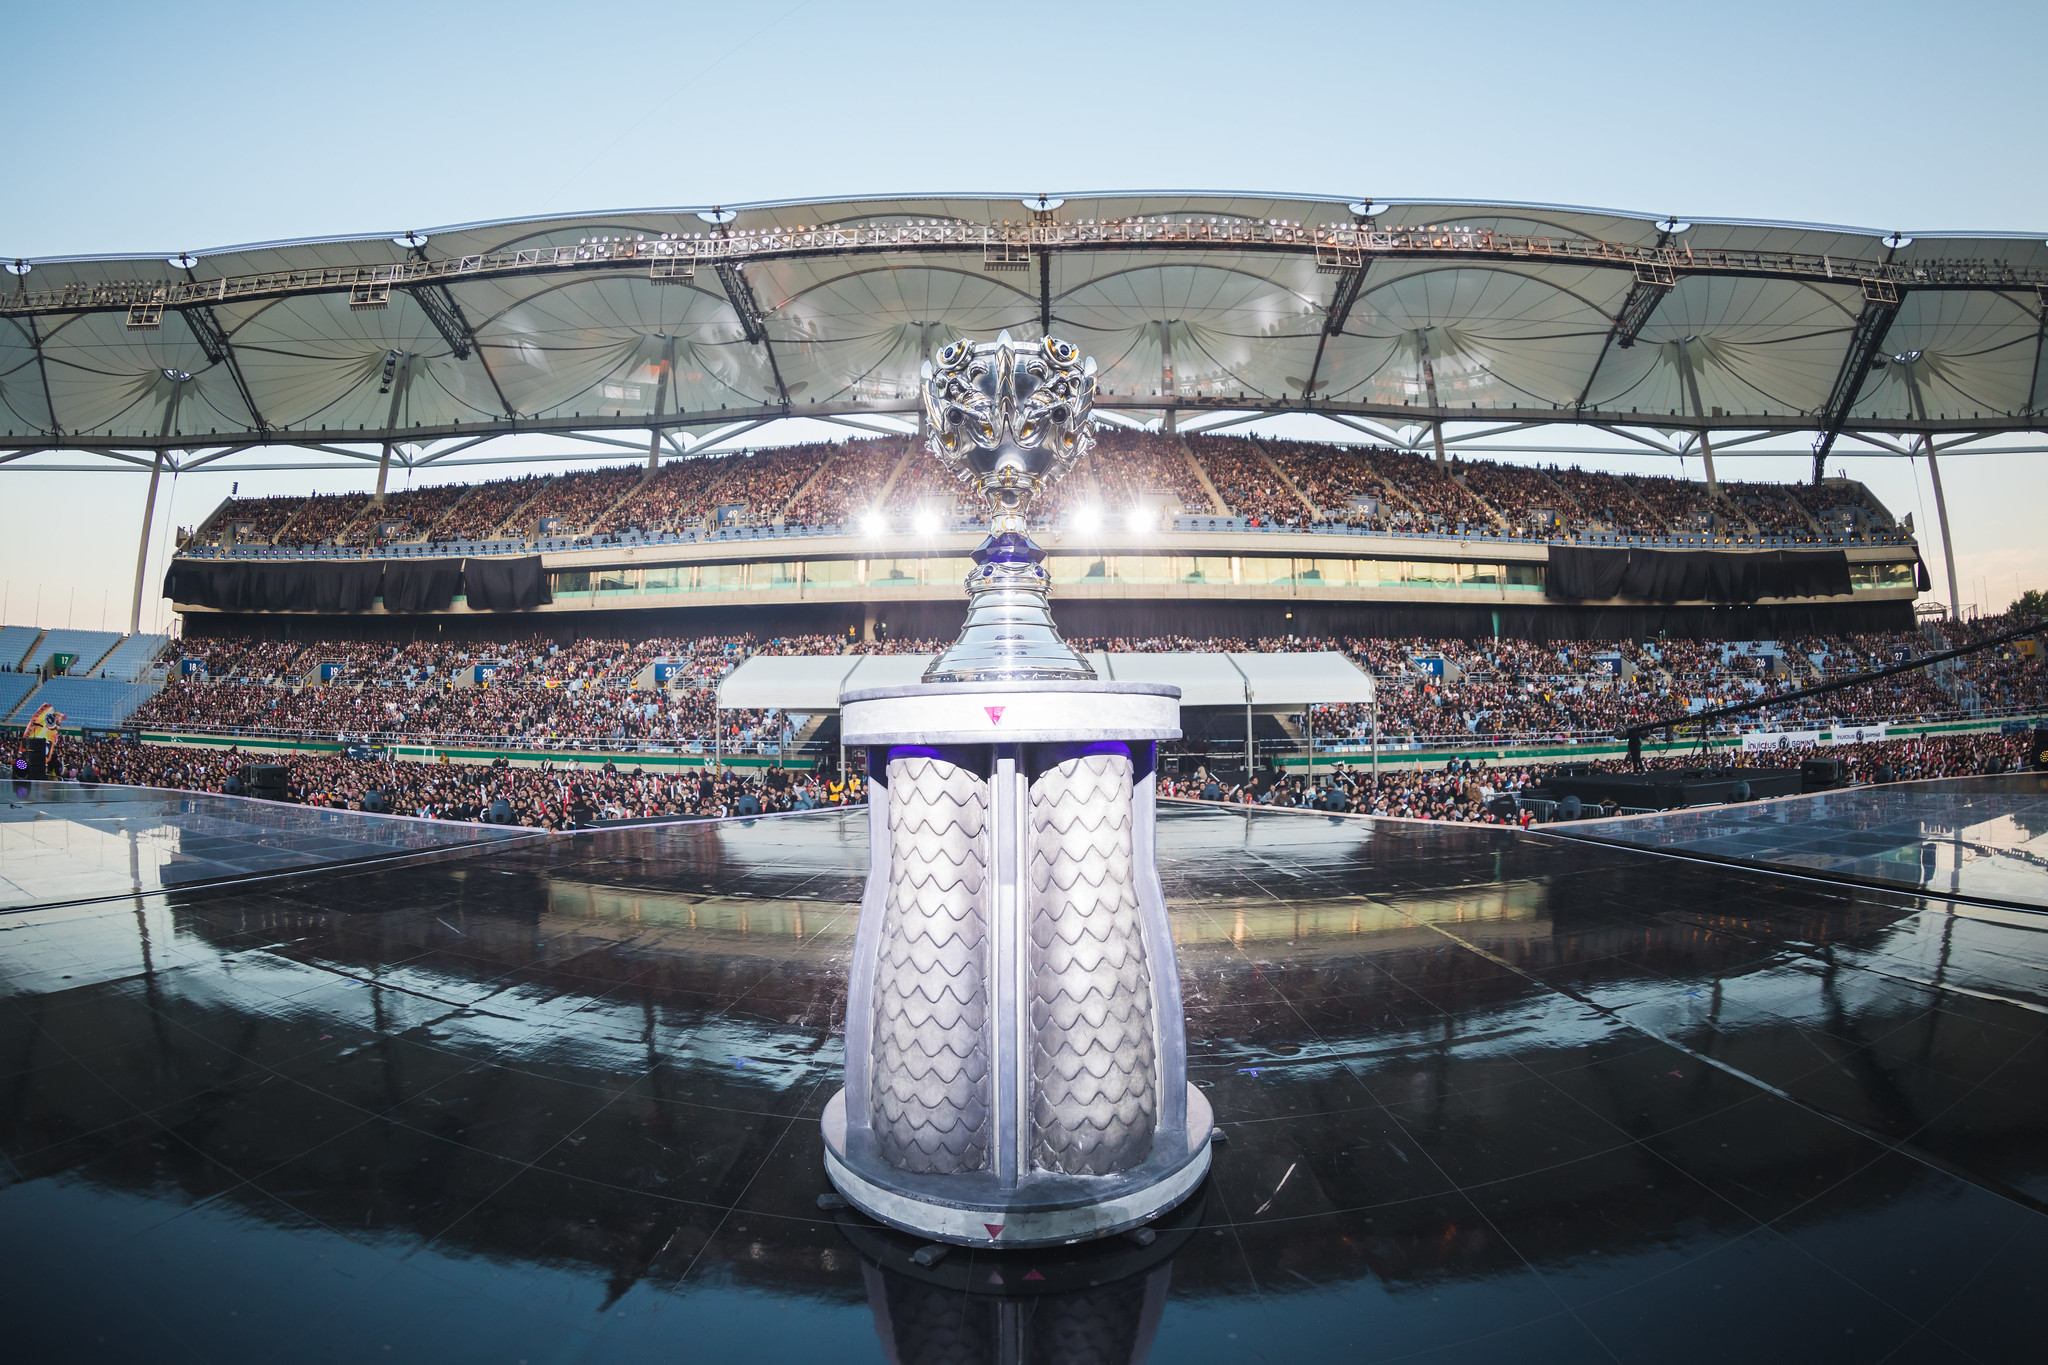 2019 World Championship Cities, Venues, and Dates